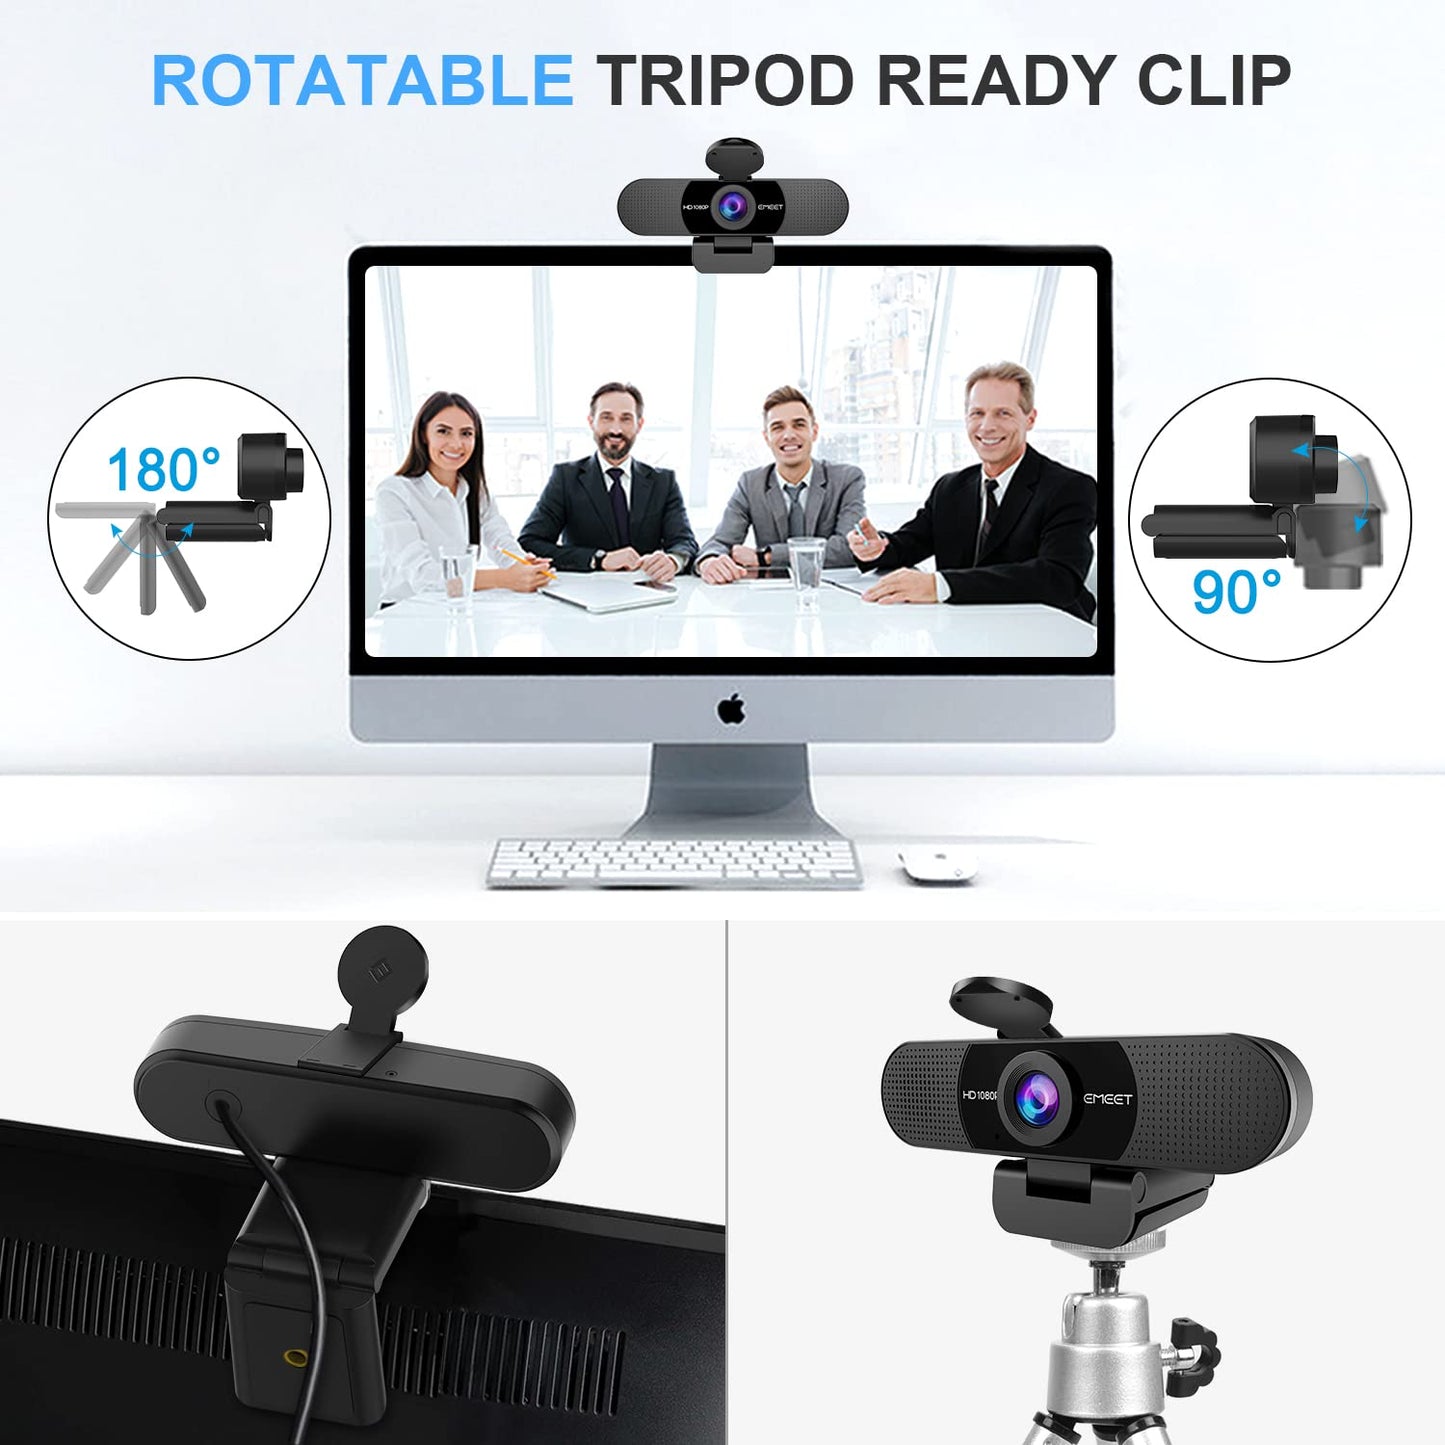 EMEET 1080P Webcam with Microphone, C960 Web Camera, 2 Mics Streaming Webcam, 90°FOV Computer Camera, Plug and Play USB Webcam for Online Calling/Conferencing, Zoom/Skype/Facetime/YouTube, Laptop/PC